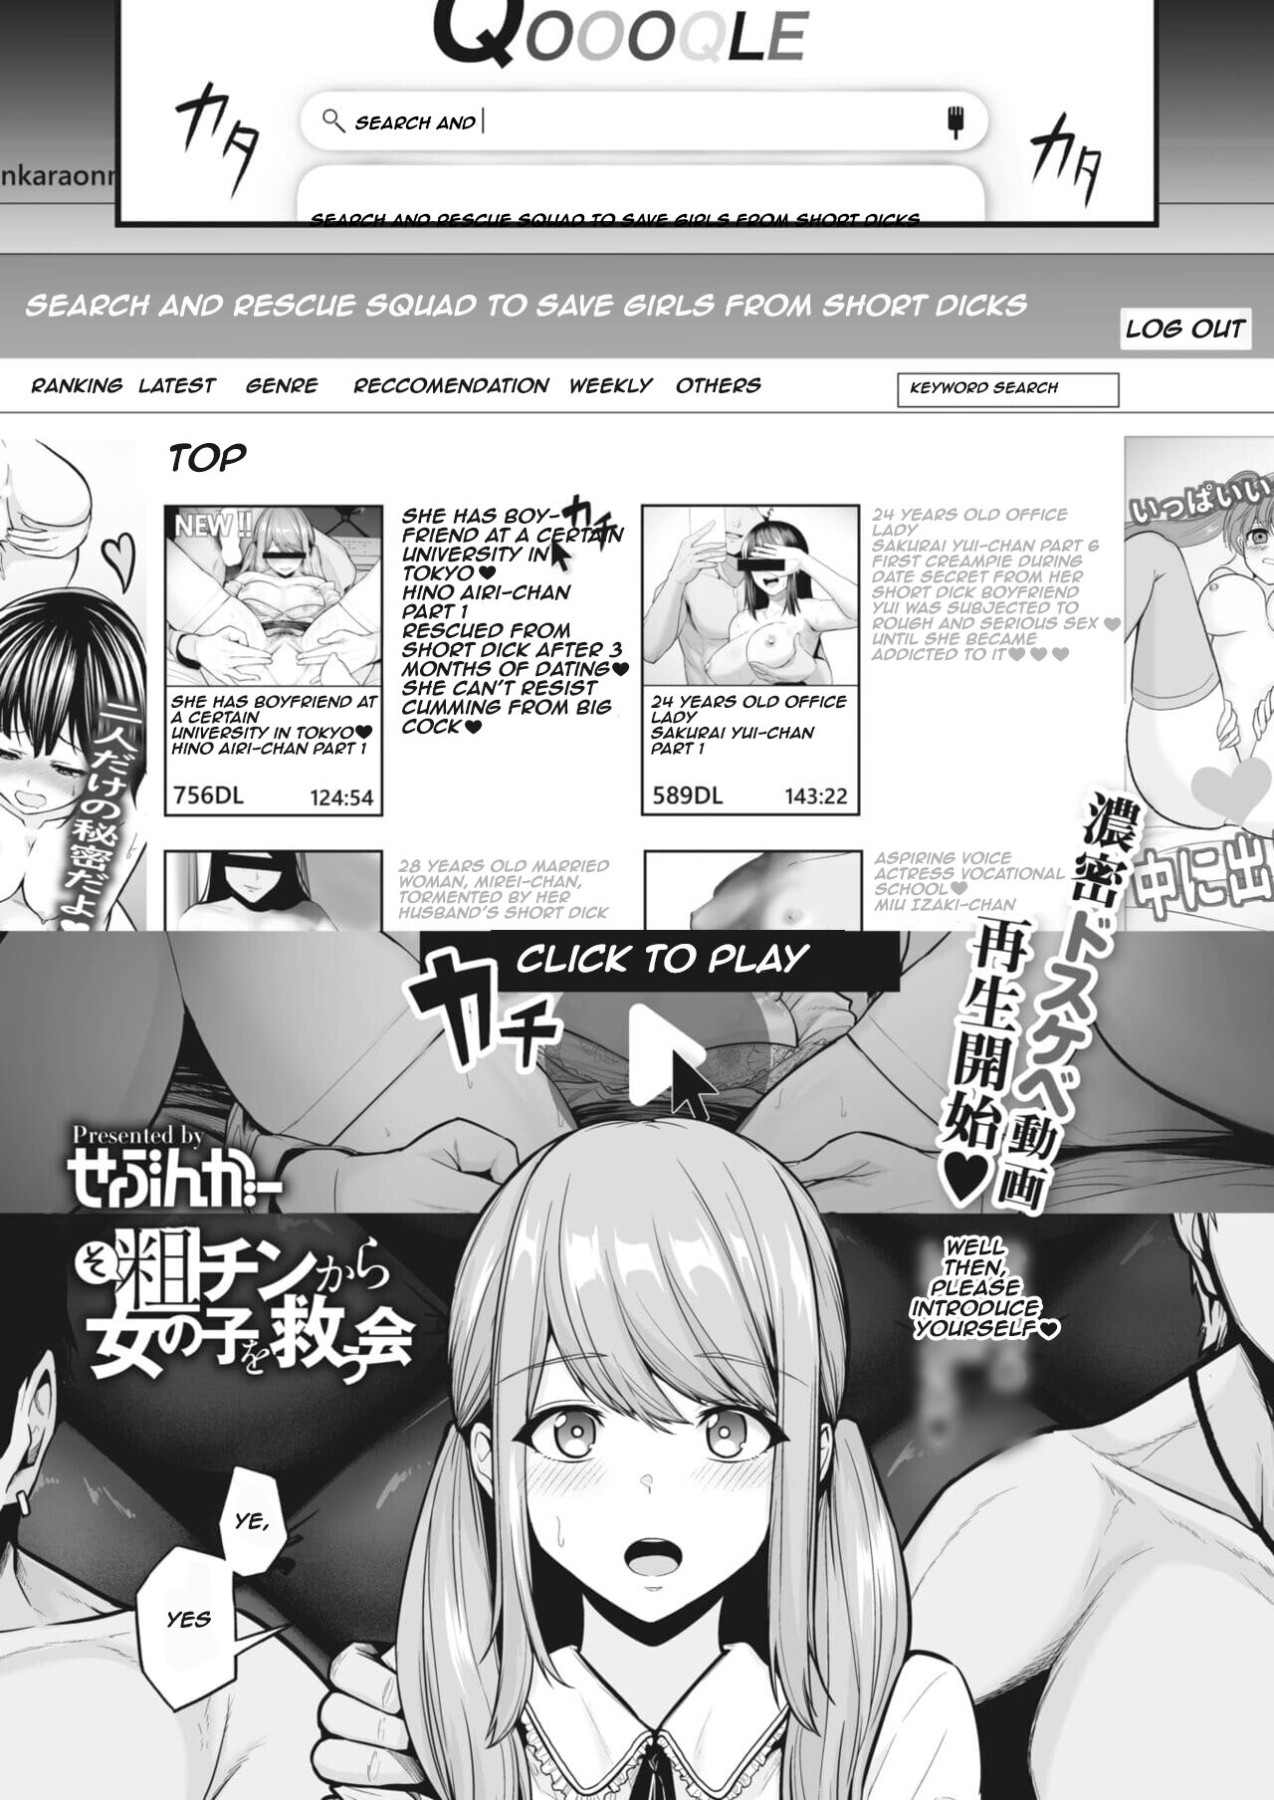 Hentai Manga Comic-Search and Rescue Squad to Save Girls From Short Dicks-Read-1